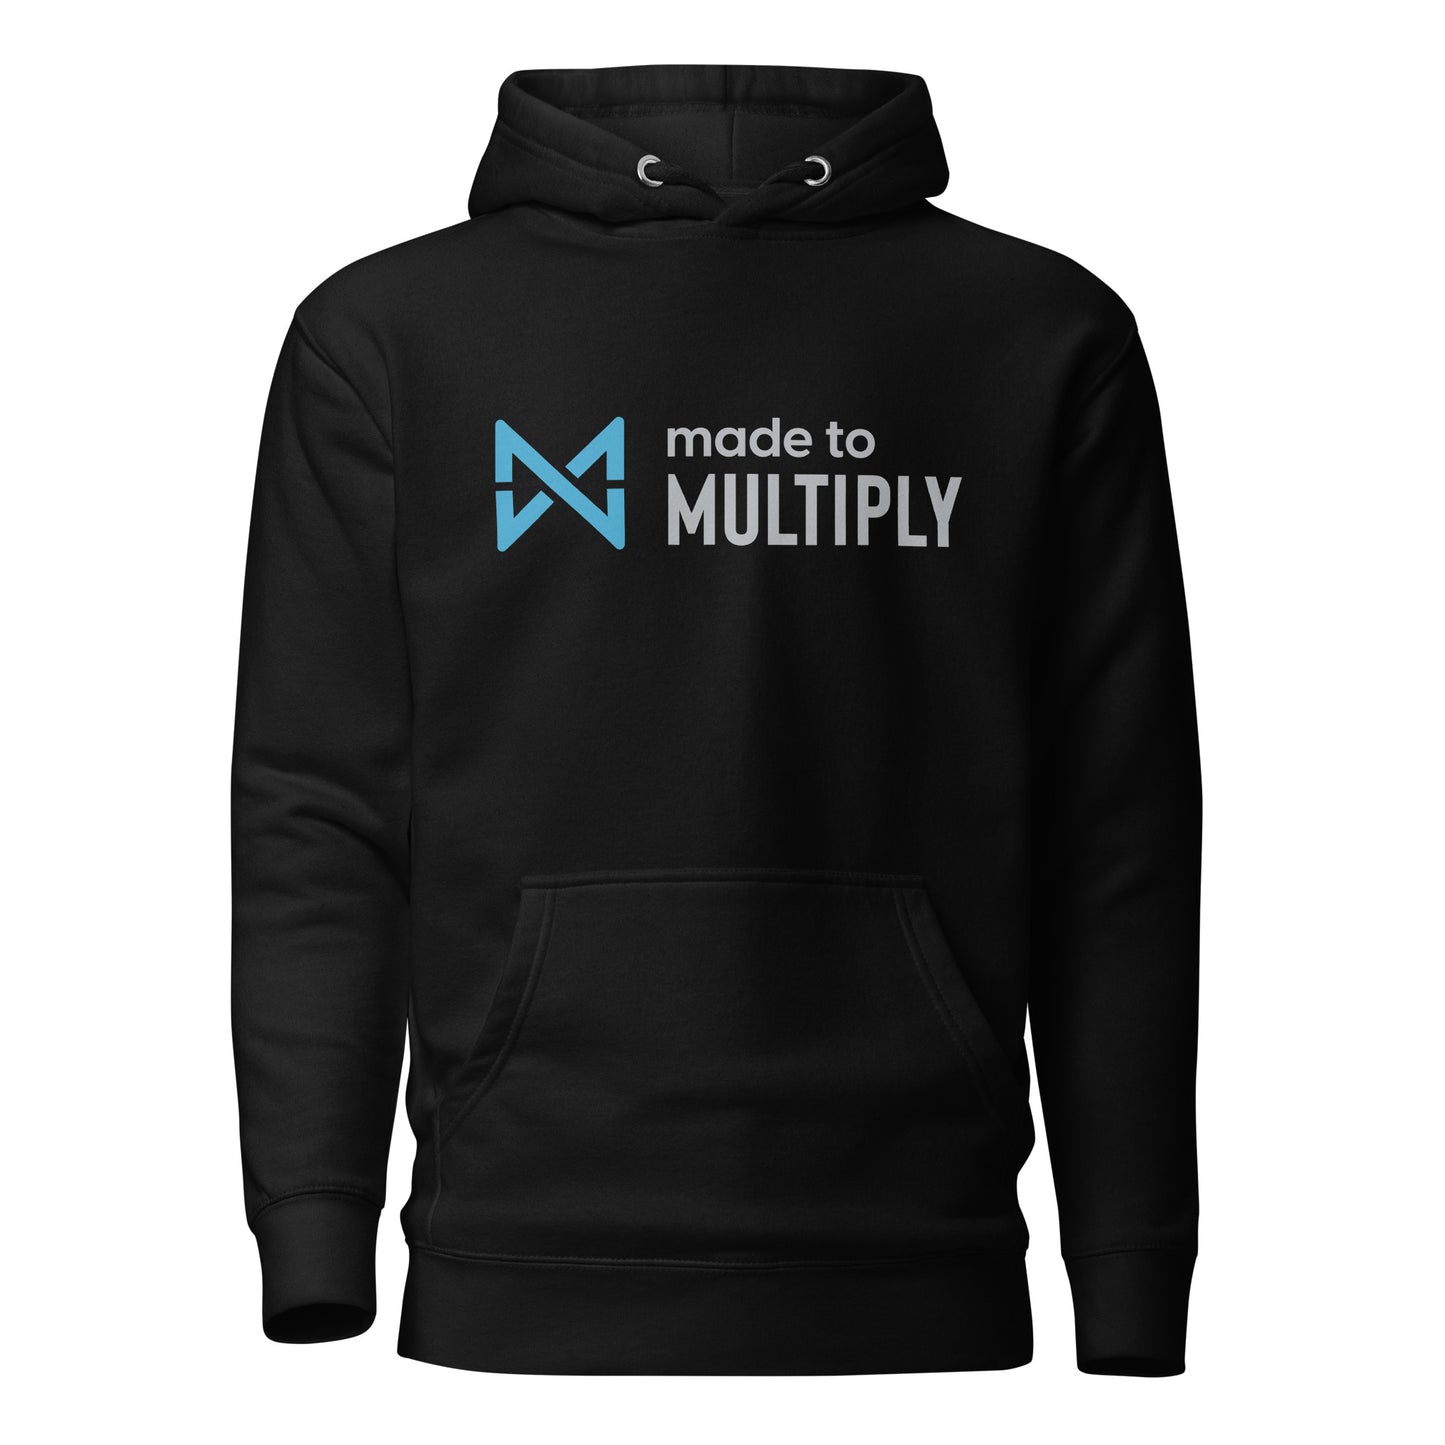 Made to Multiply - Unisex Hoodie